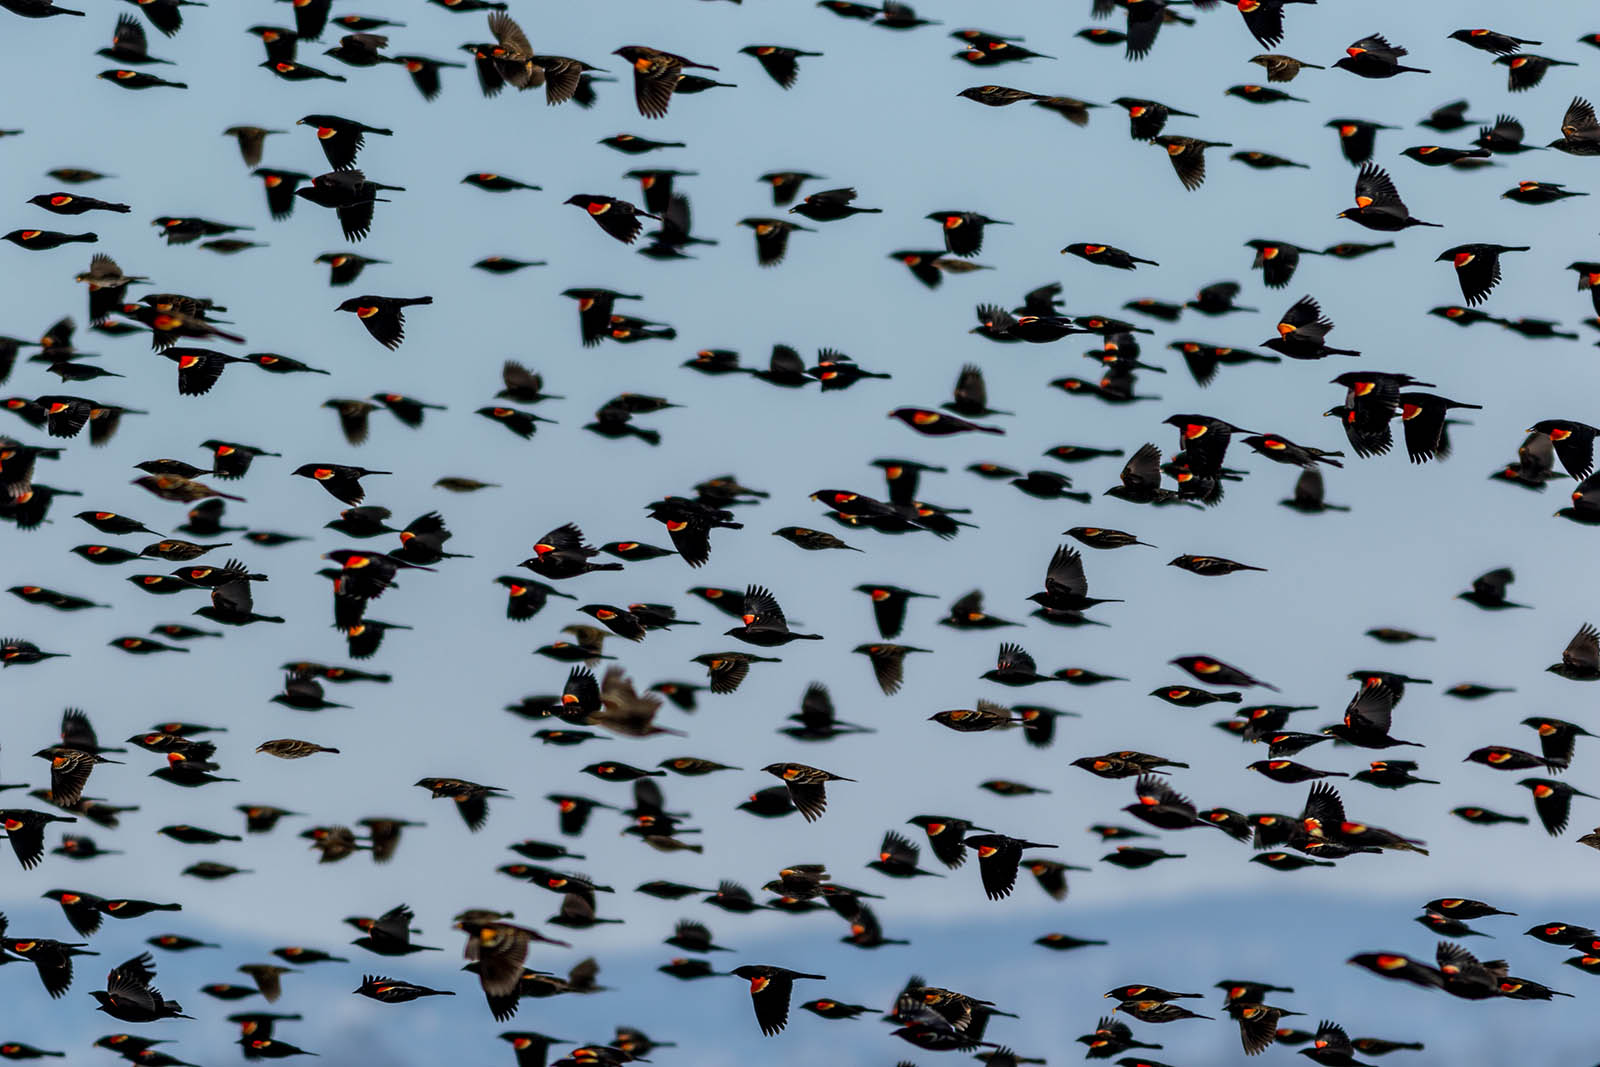 Black birds with red and cream-colored patches on their wings flying in a large group